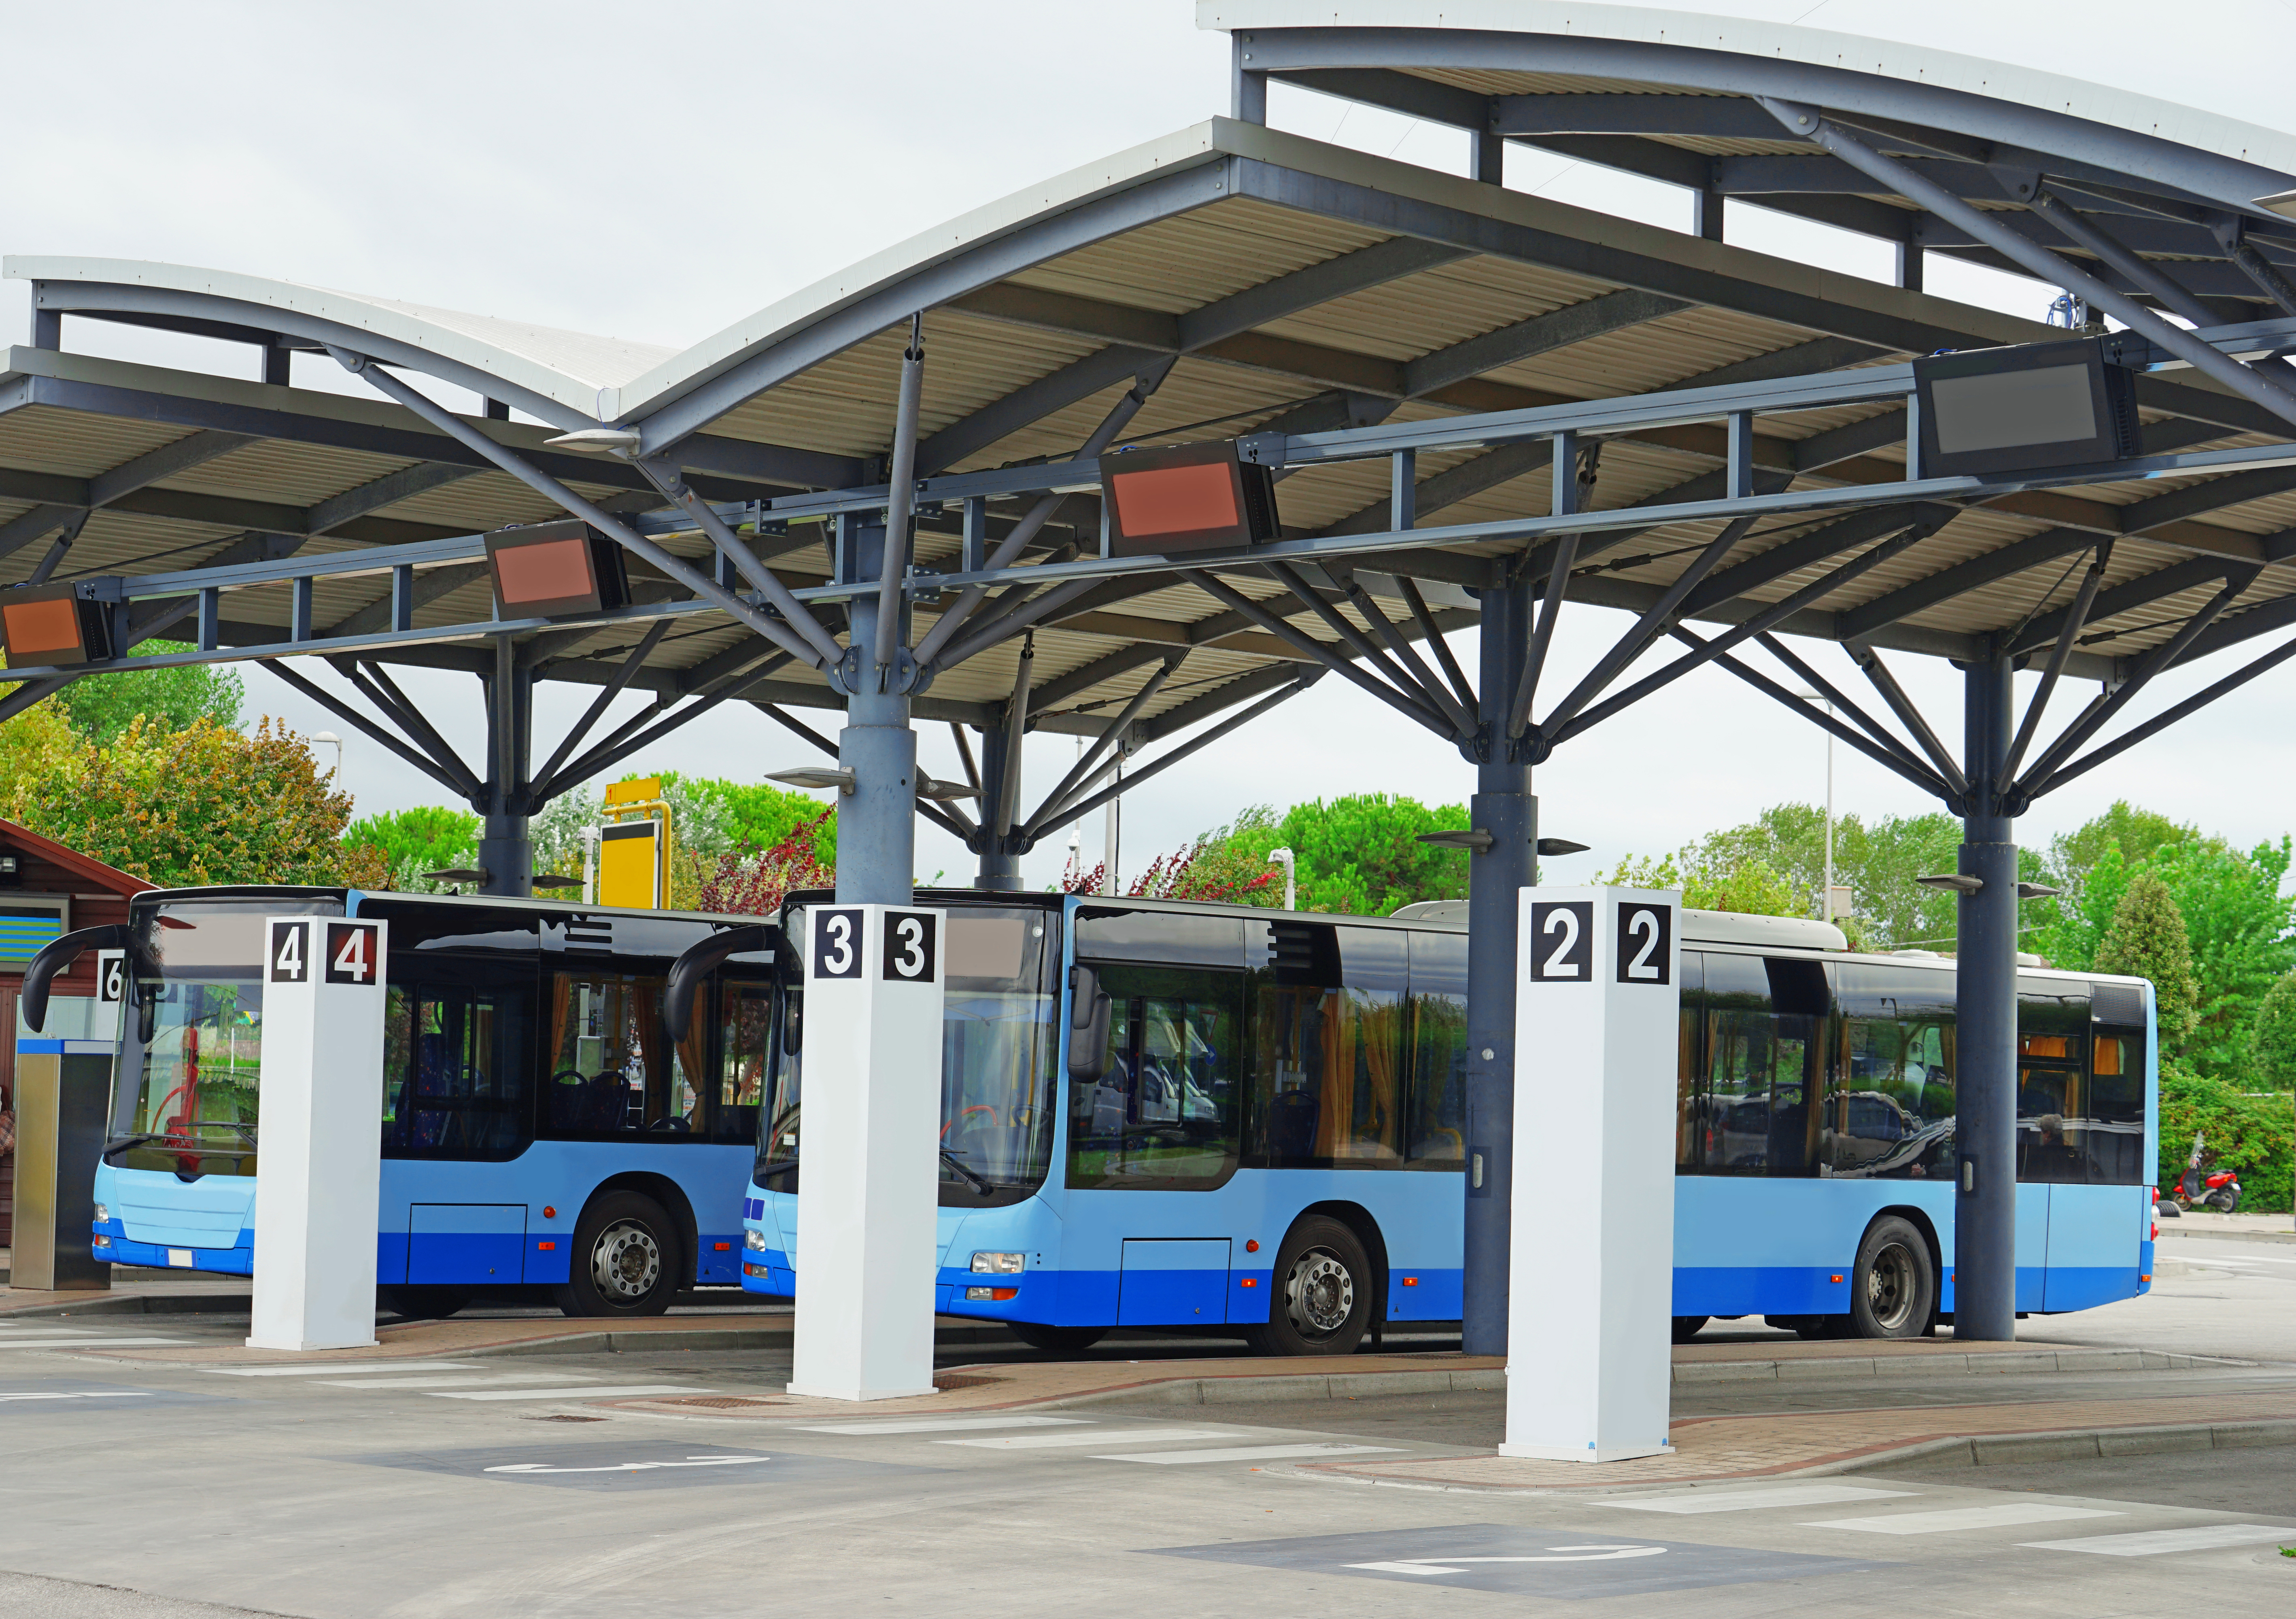 Bus station with blue buses. | Source: Shutterstock